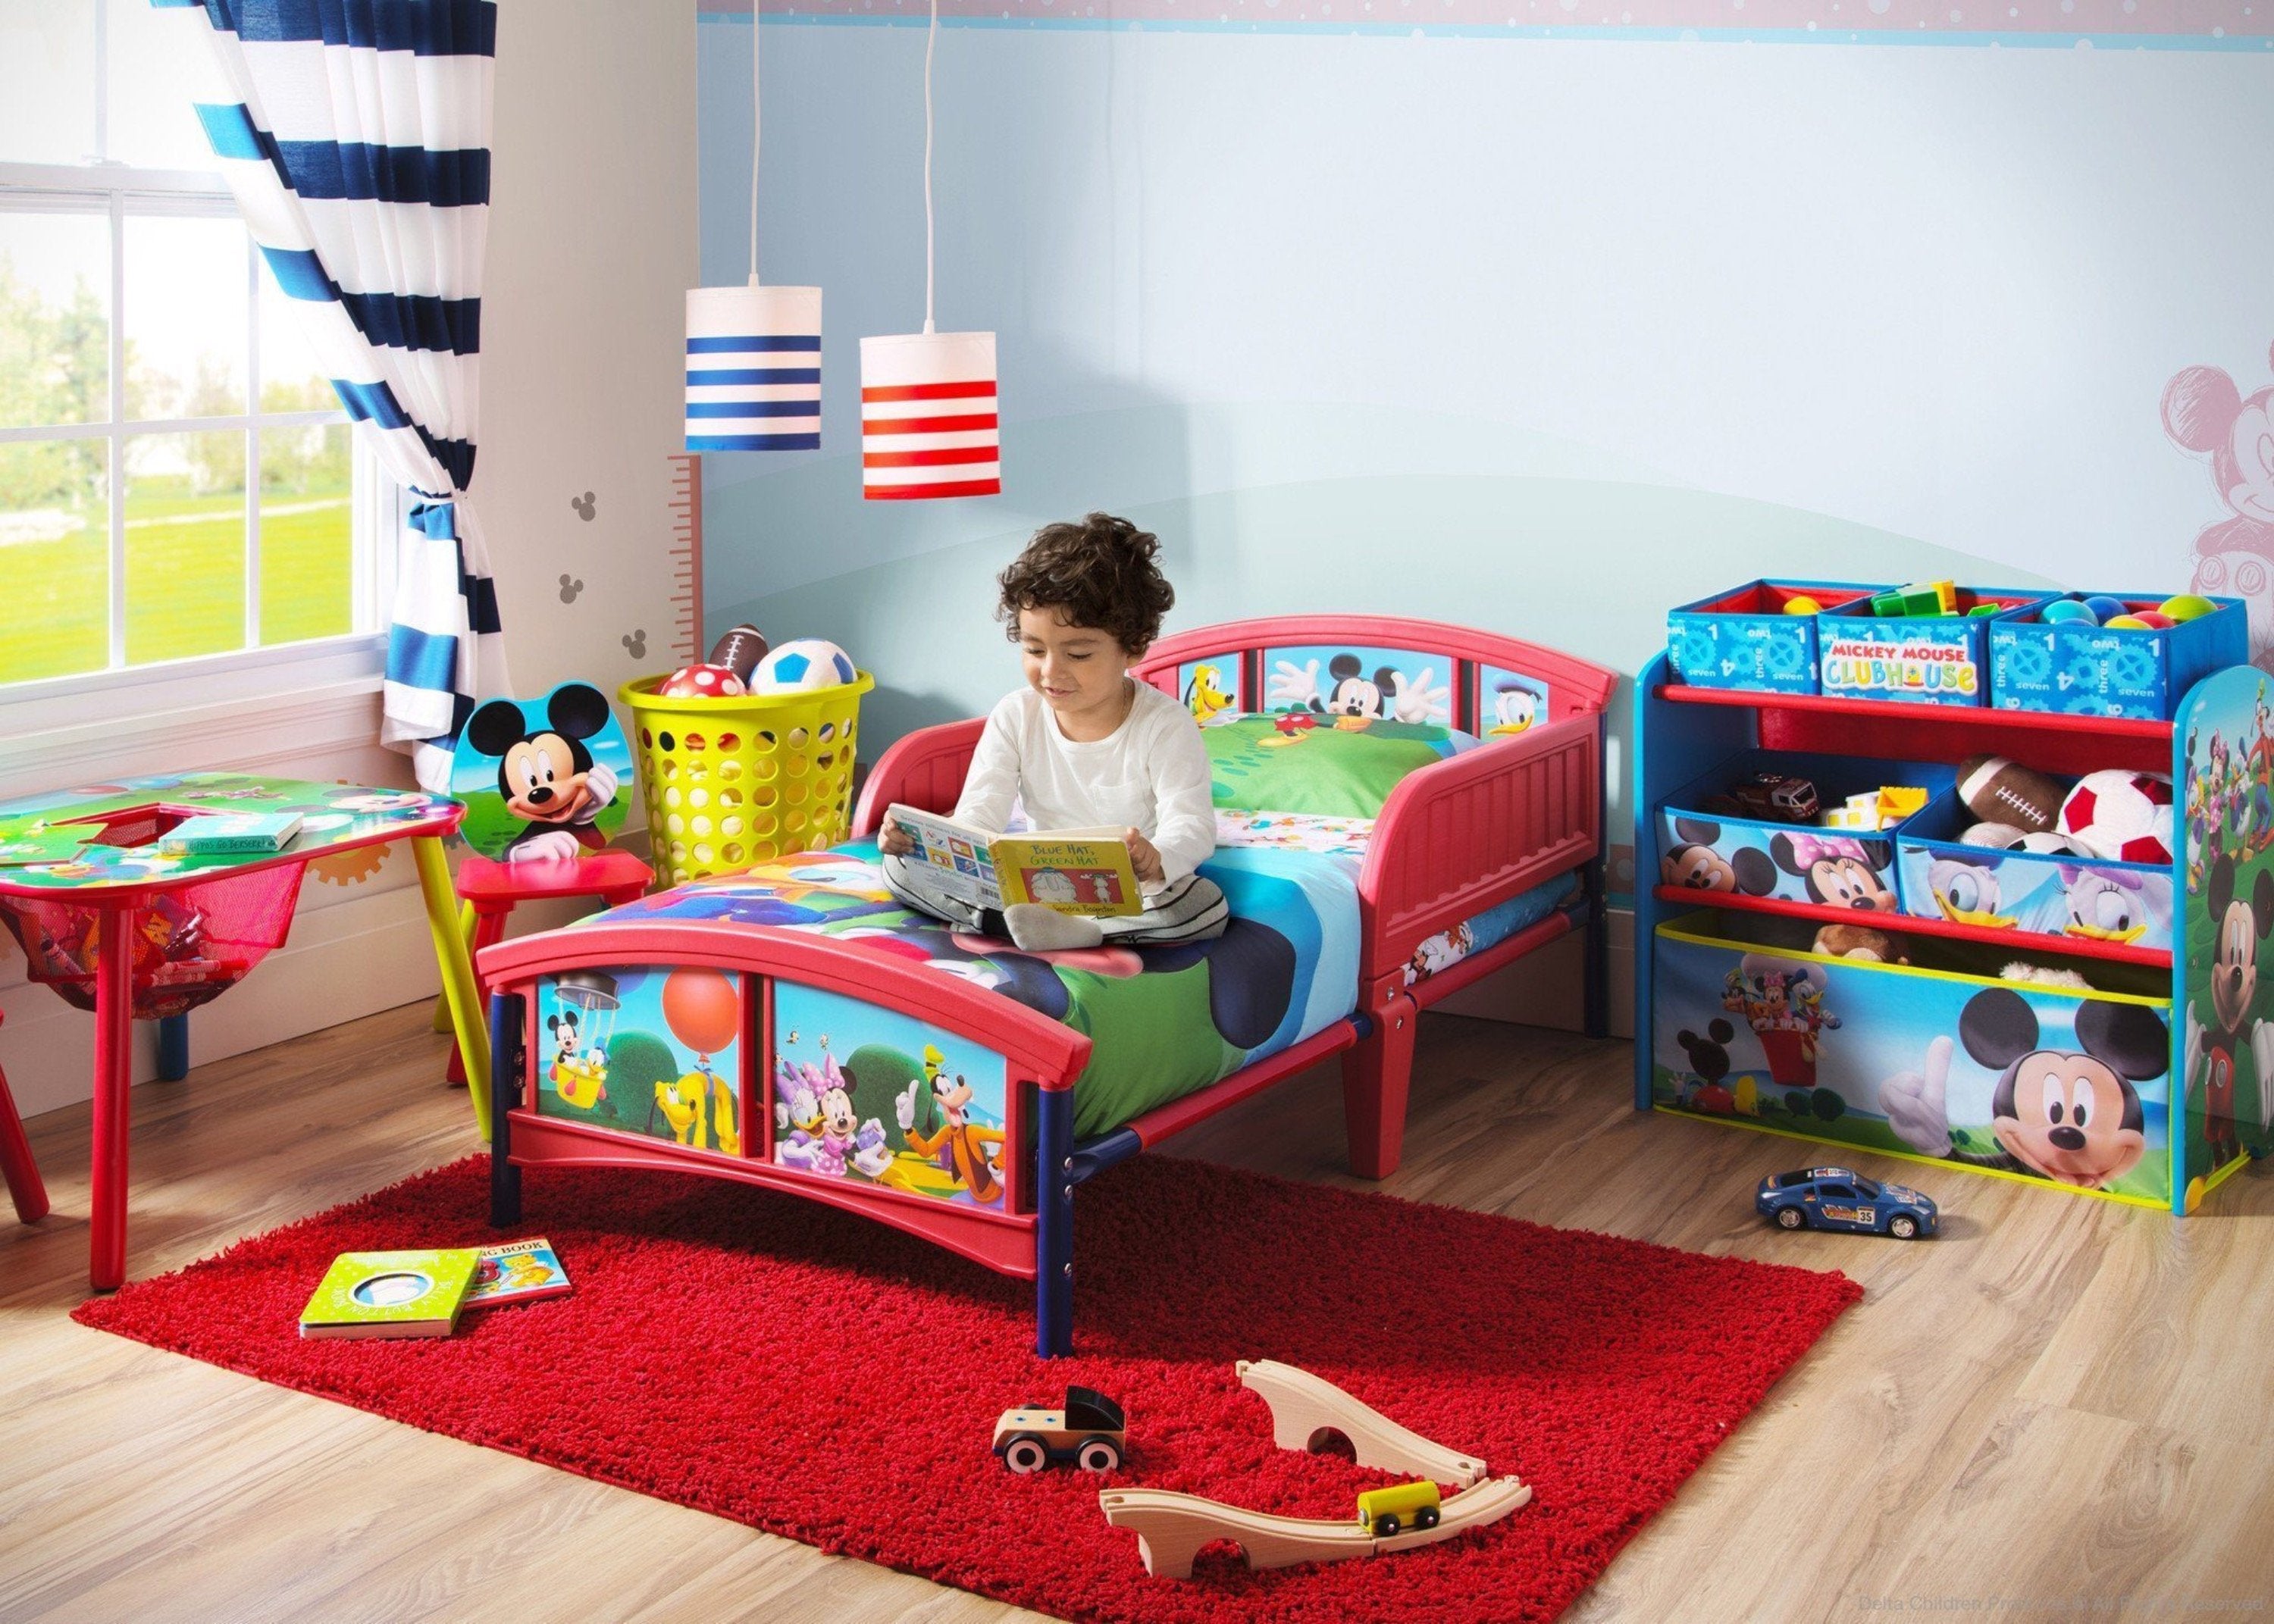 Mickey Mouse Wood Toddler Bed - Delta Children